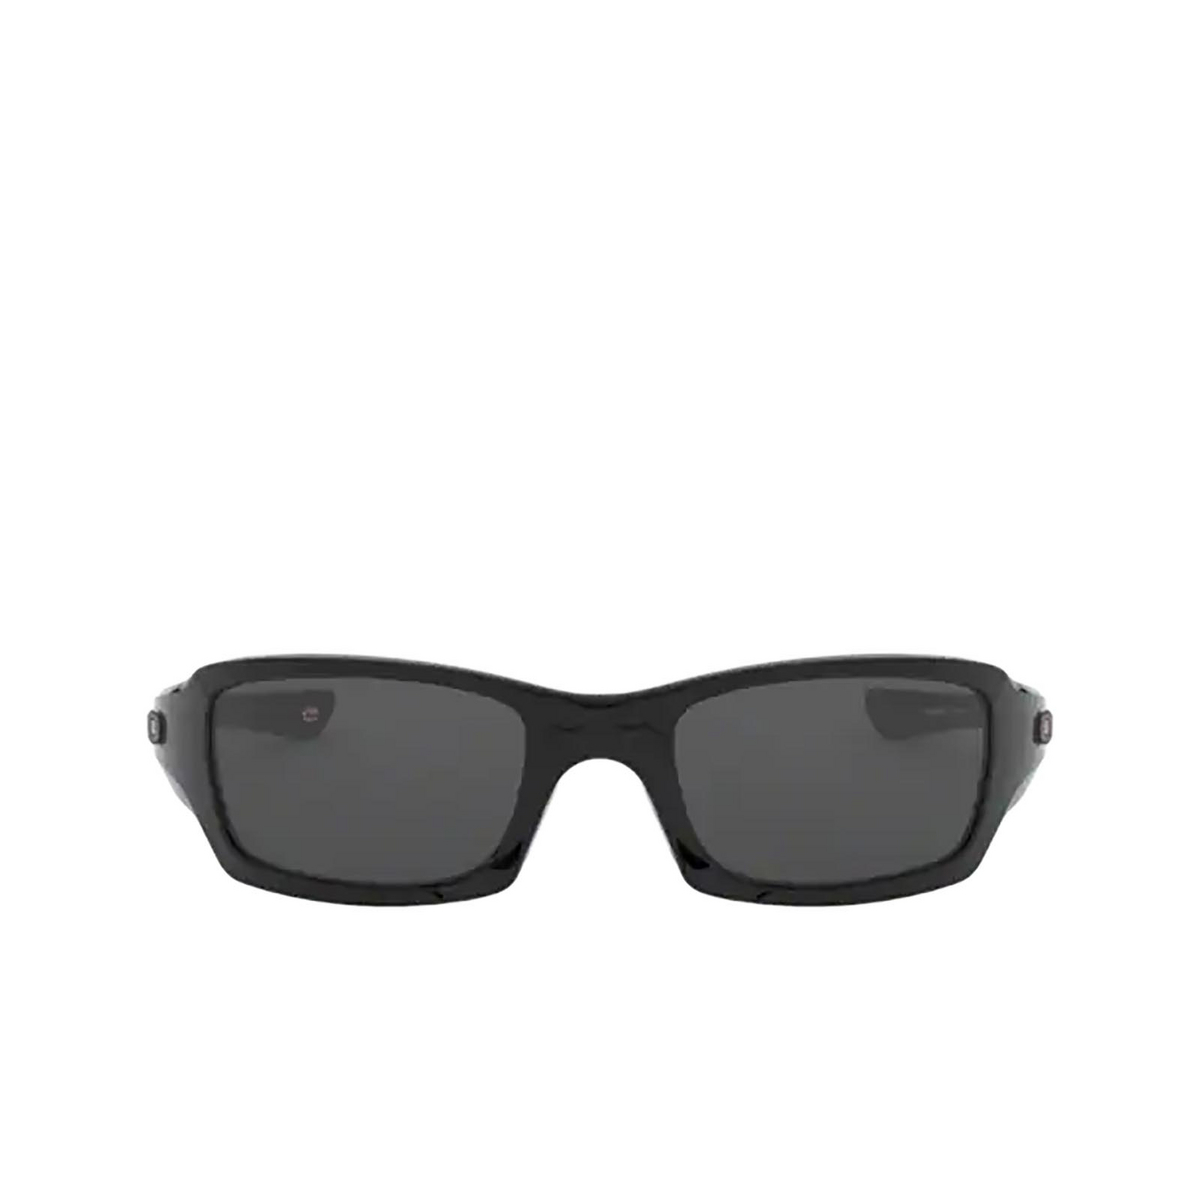 Oakley FIVES SQUARED Sunglasses 923804 Polished Black - front view